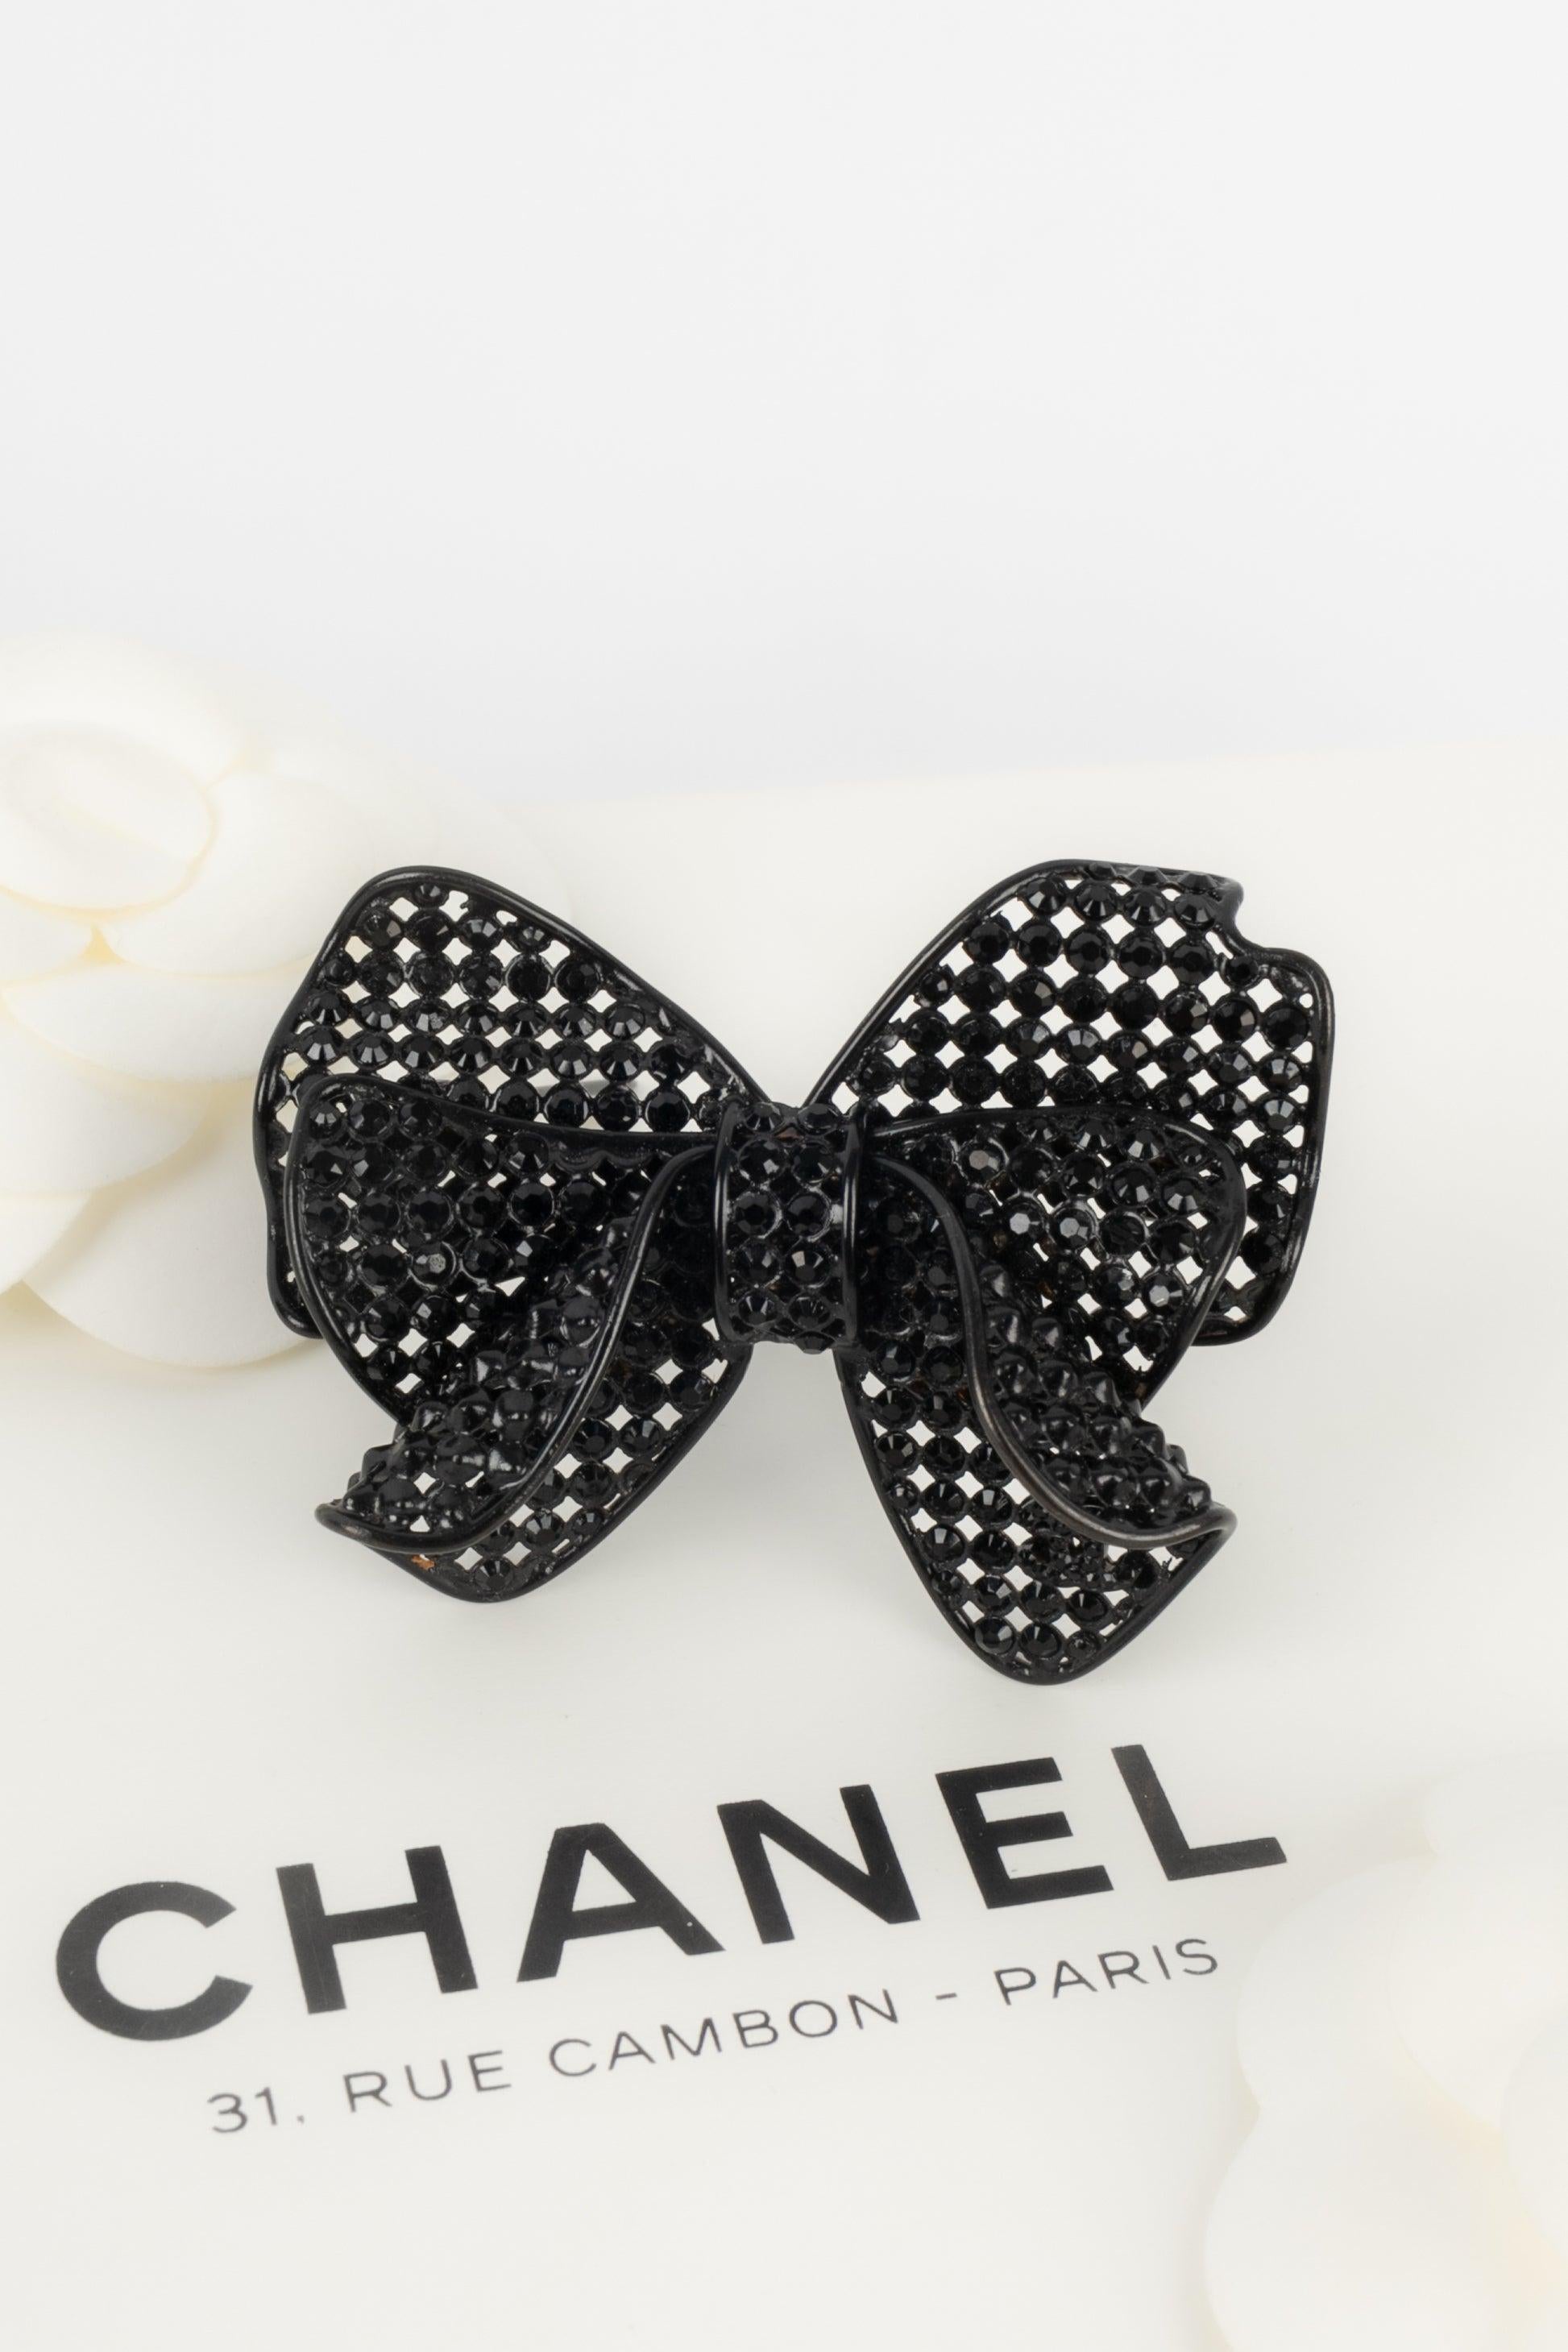 Chanel Bow Brooch in Black Metal with Black Rhinestones, 2009 For Sale 1